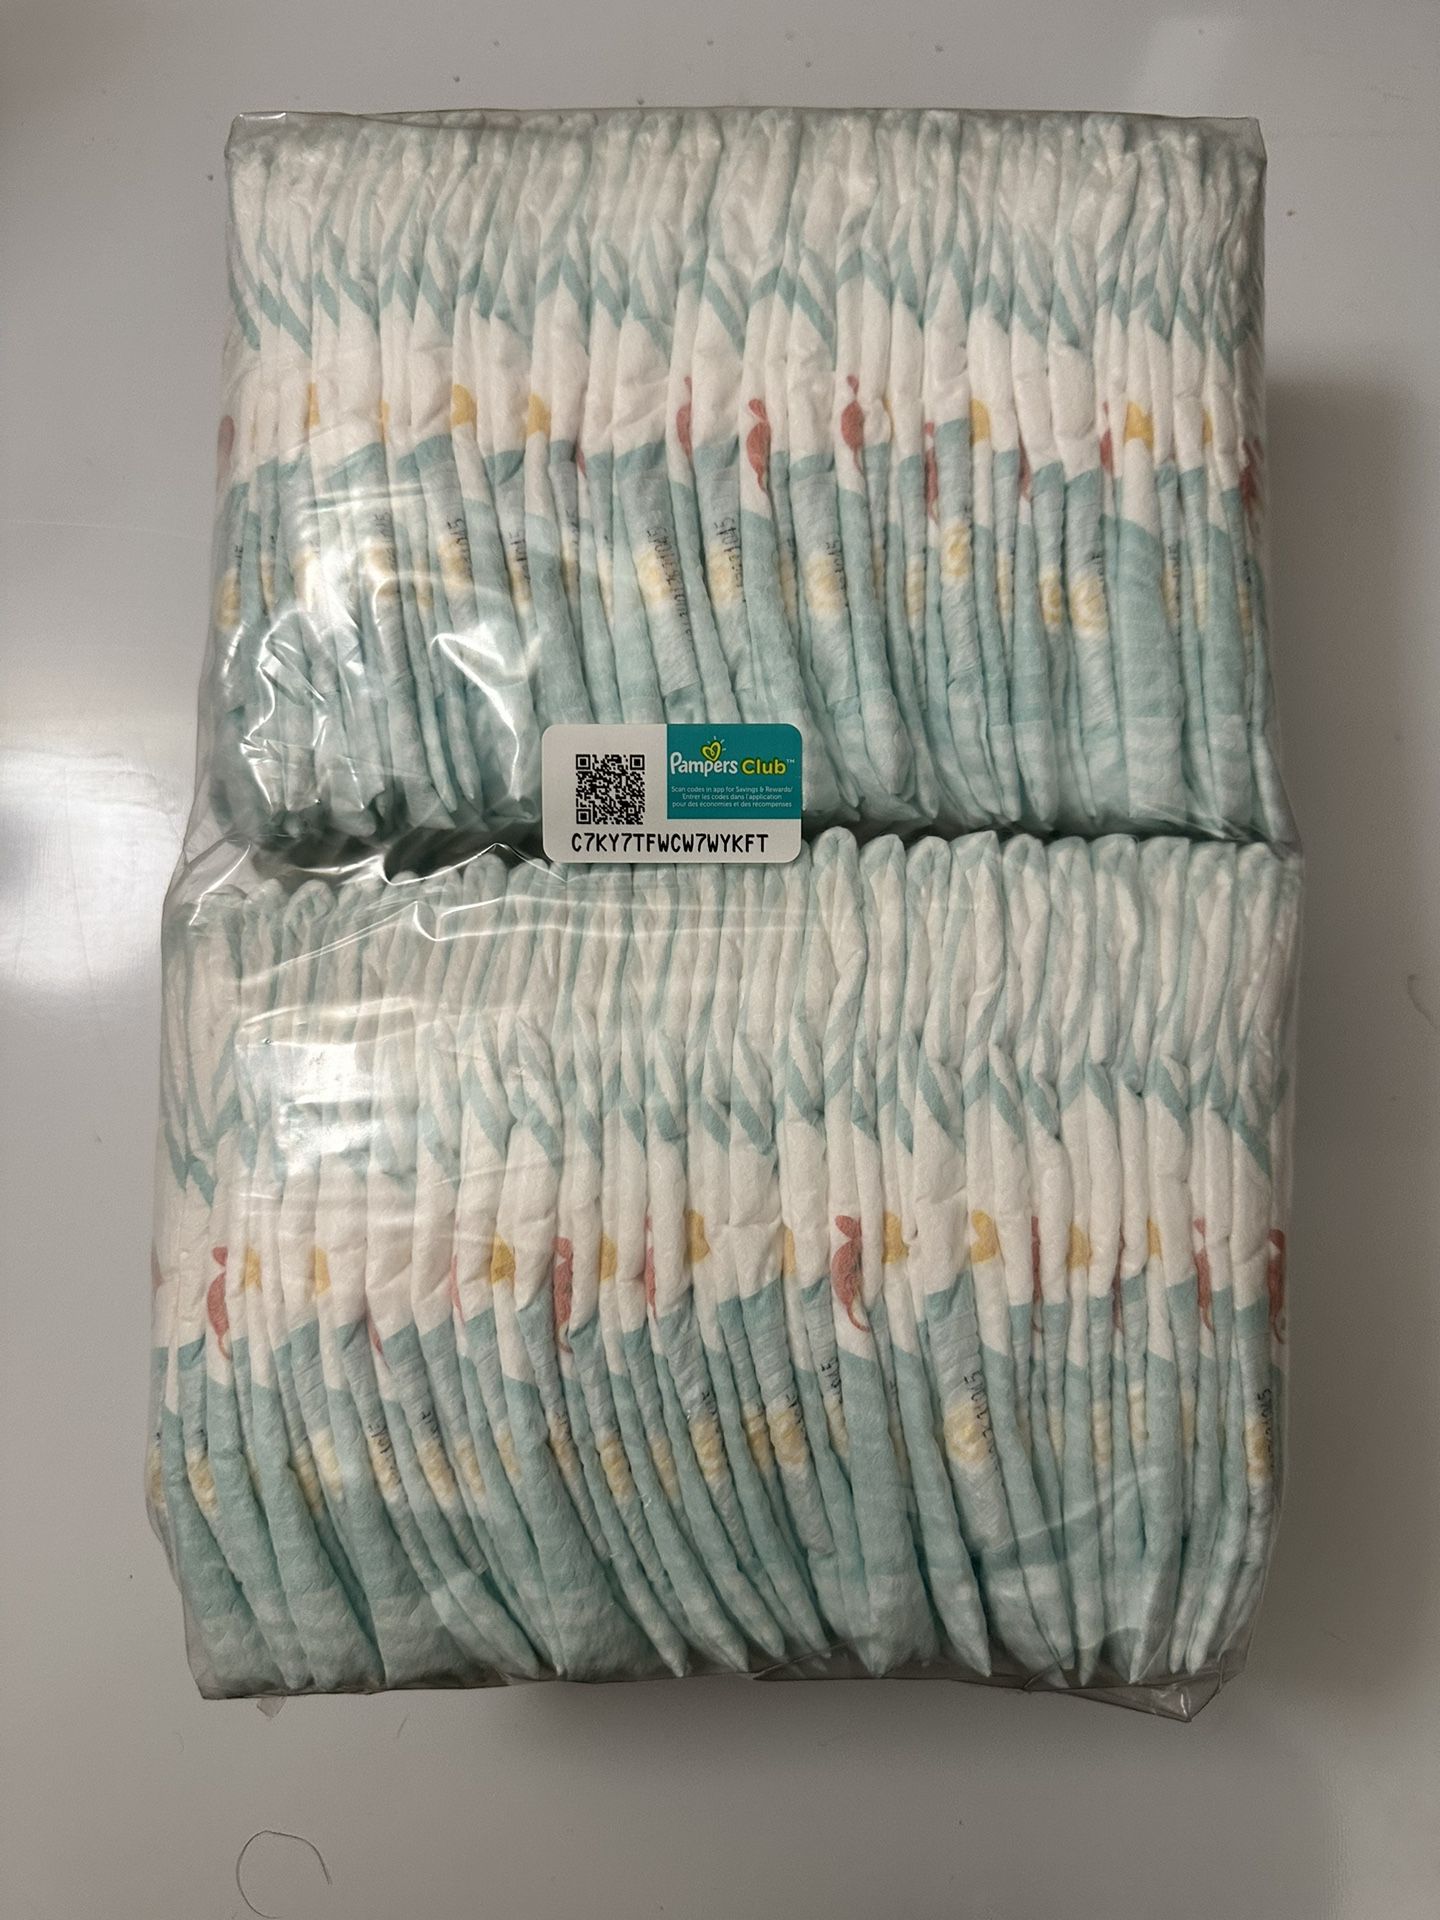 52 Diapers Size Newborn For $10